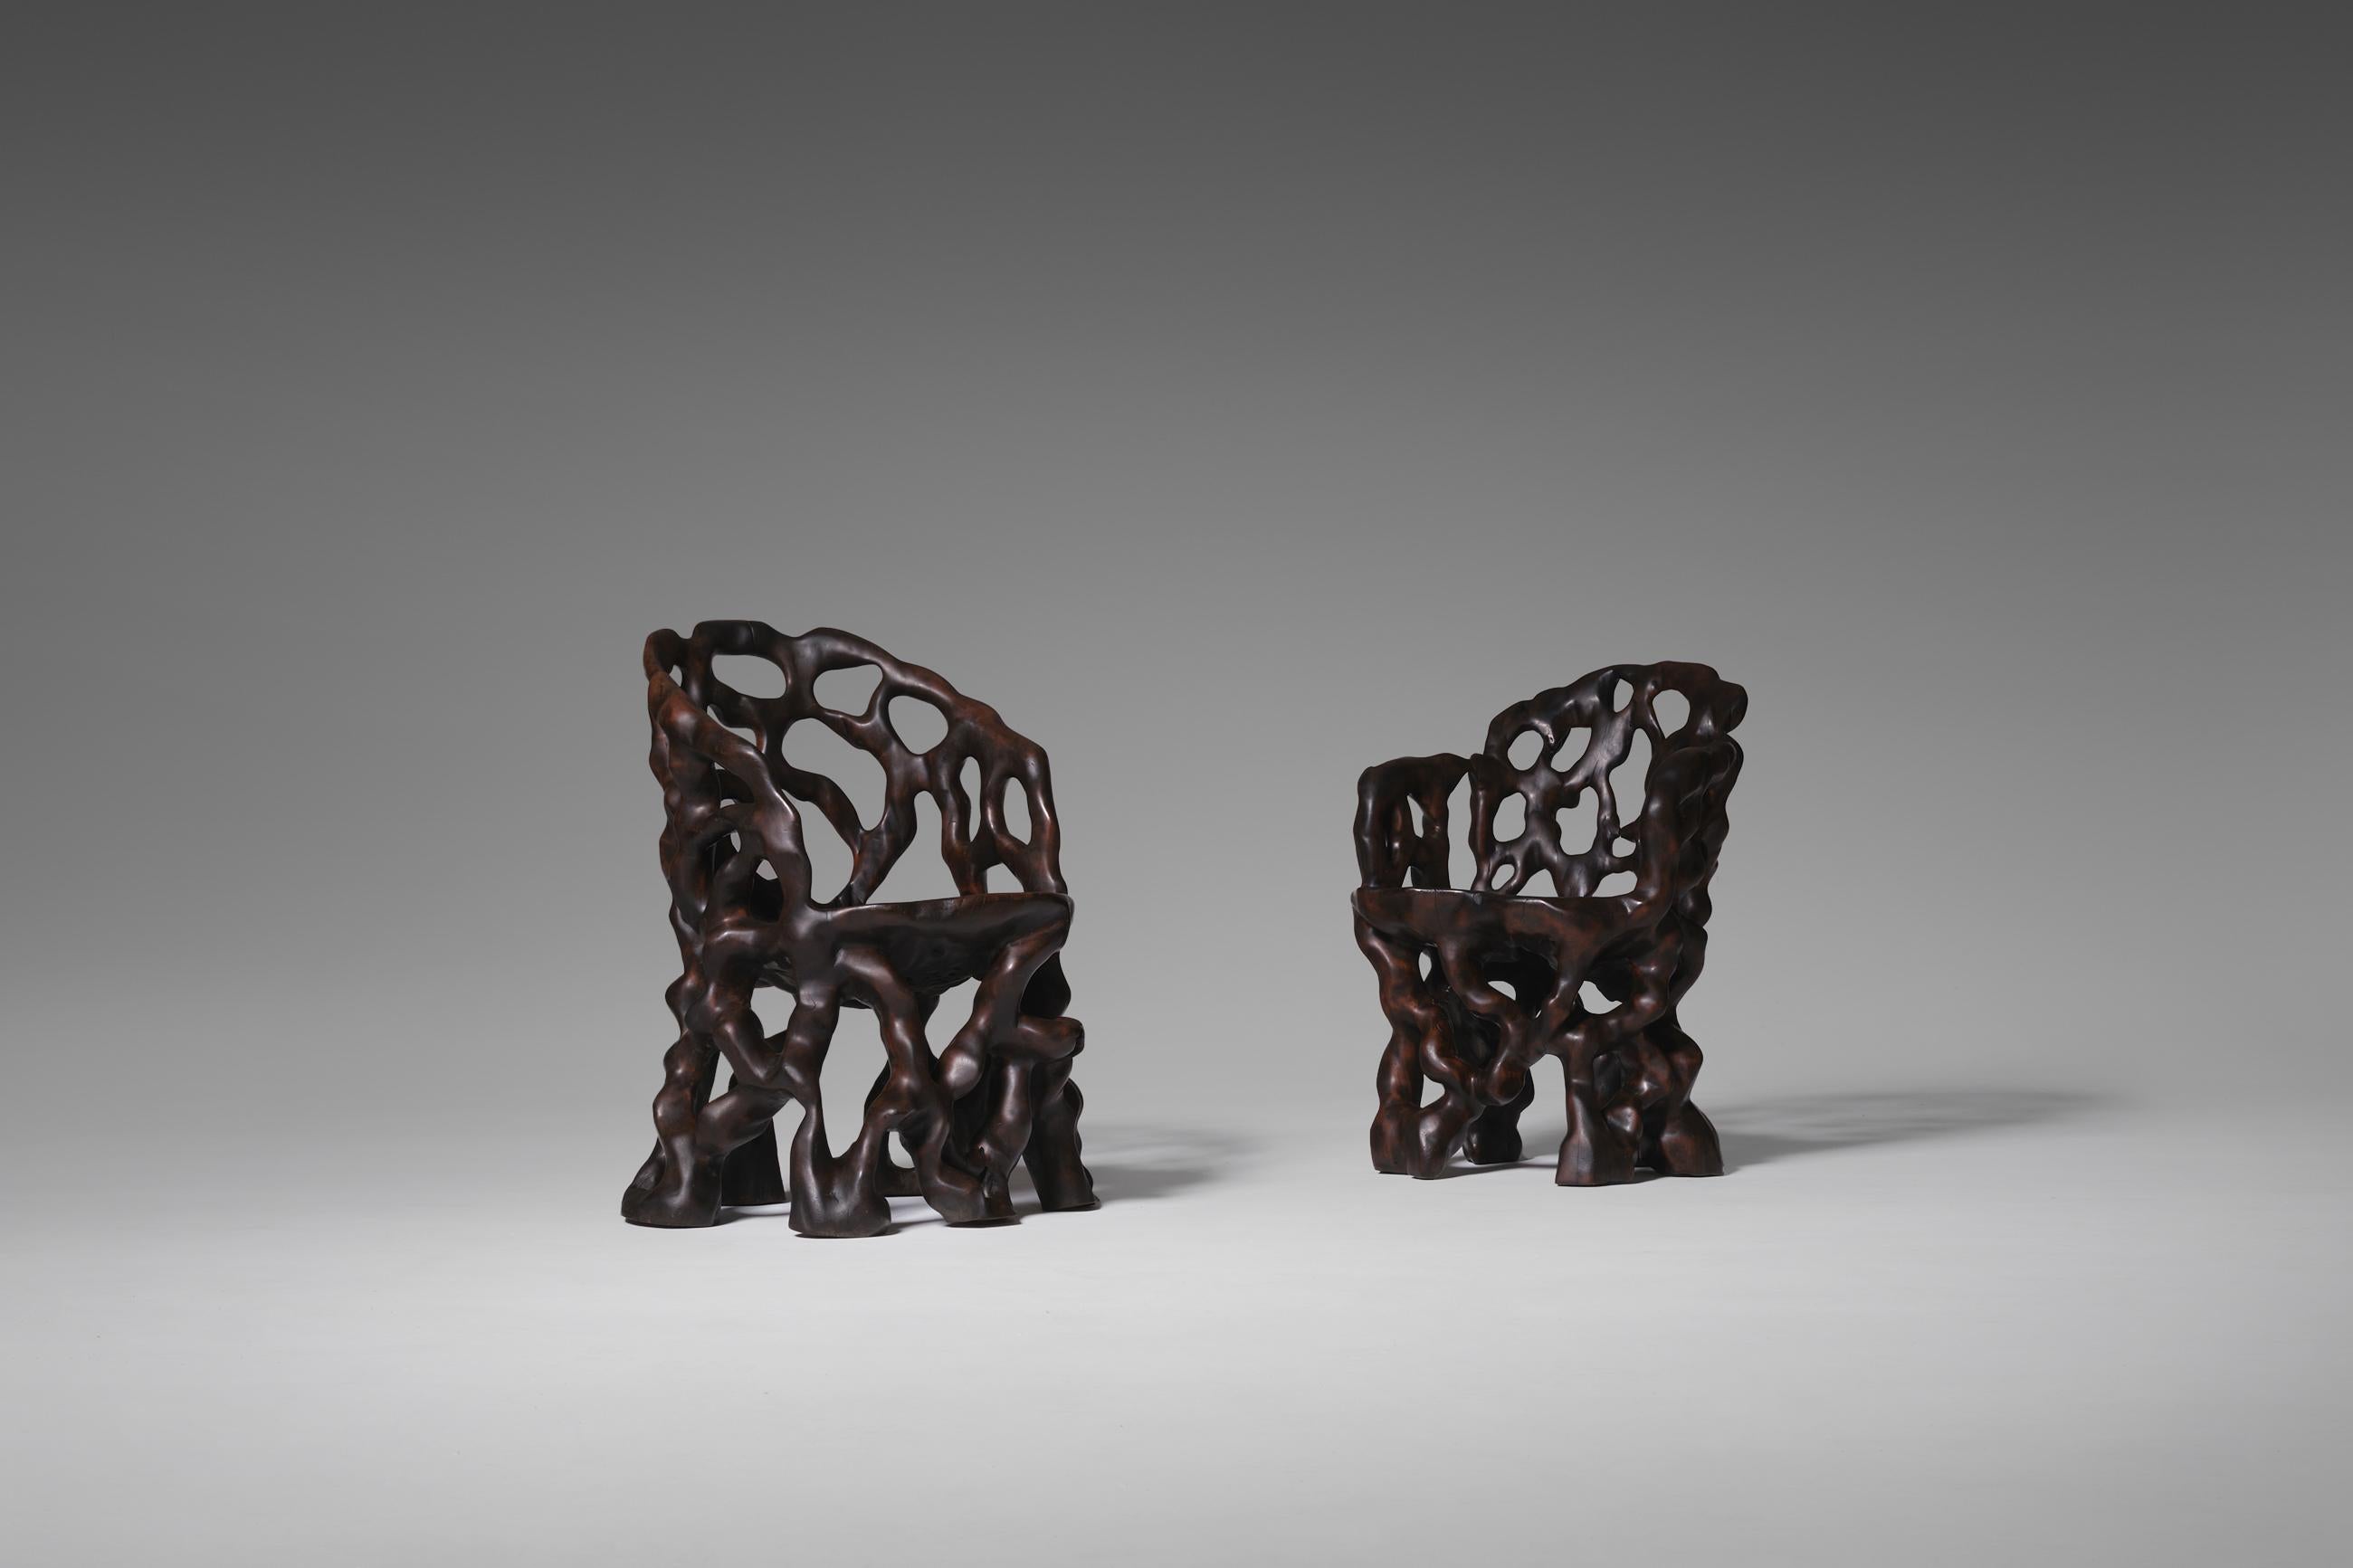 Unique set of sculptural wooden tree trunk chairs, 1970s. The chairs are hand carved out of a solid piece of tropical hardwood. This style of furniture making is a traditional Chinese art and goes back to the 12th century. Very unusual and highly